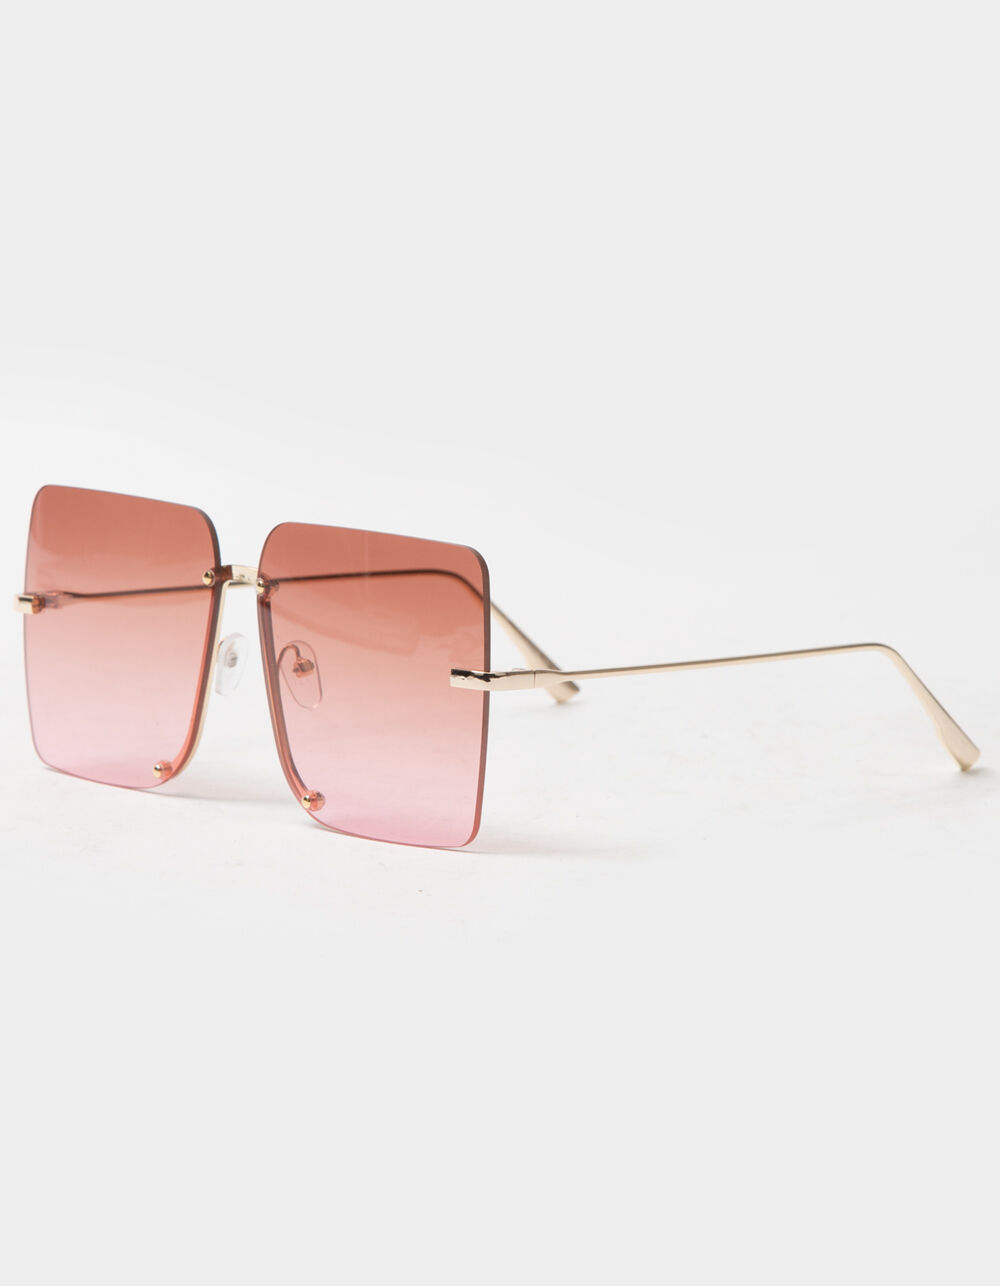 BLUE CROWN Retro Square Rimless Sunglasses - PINK COMBO | Tillys